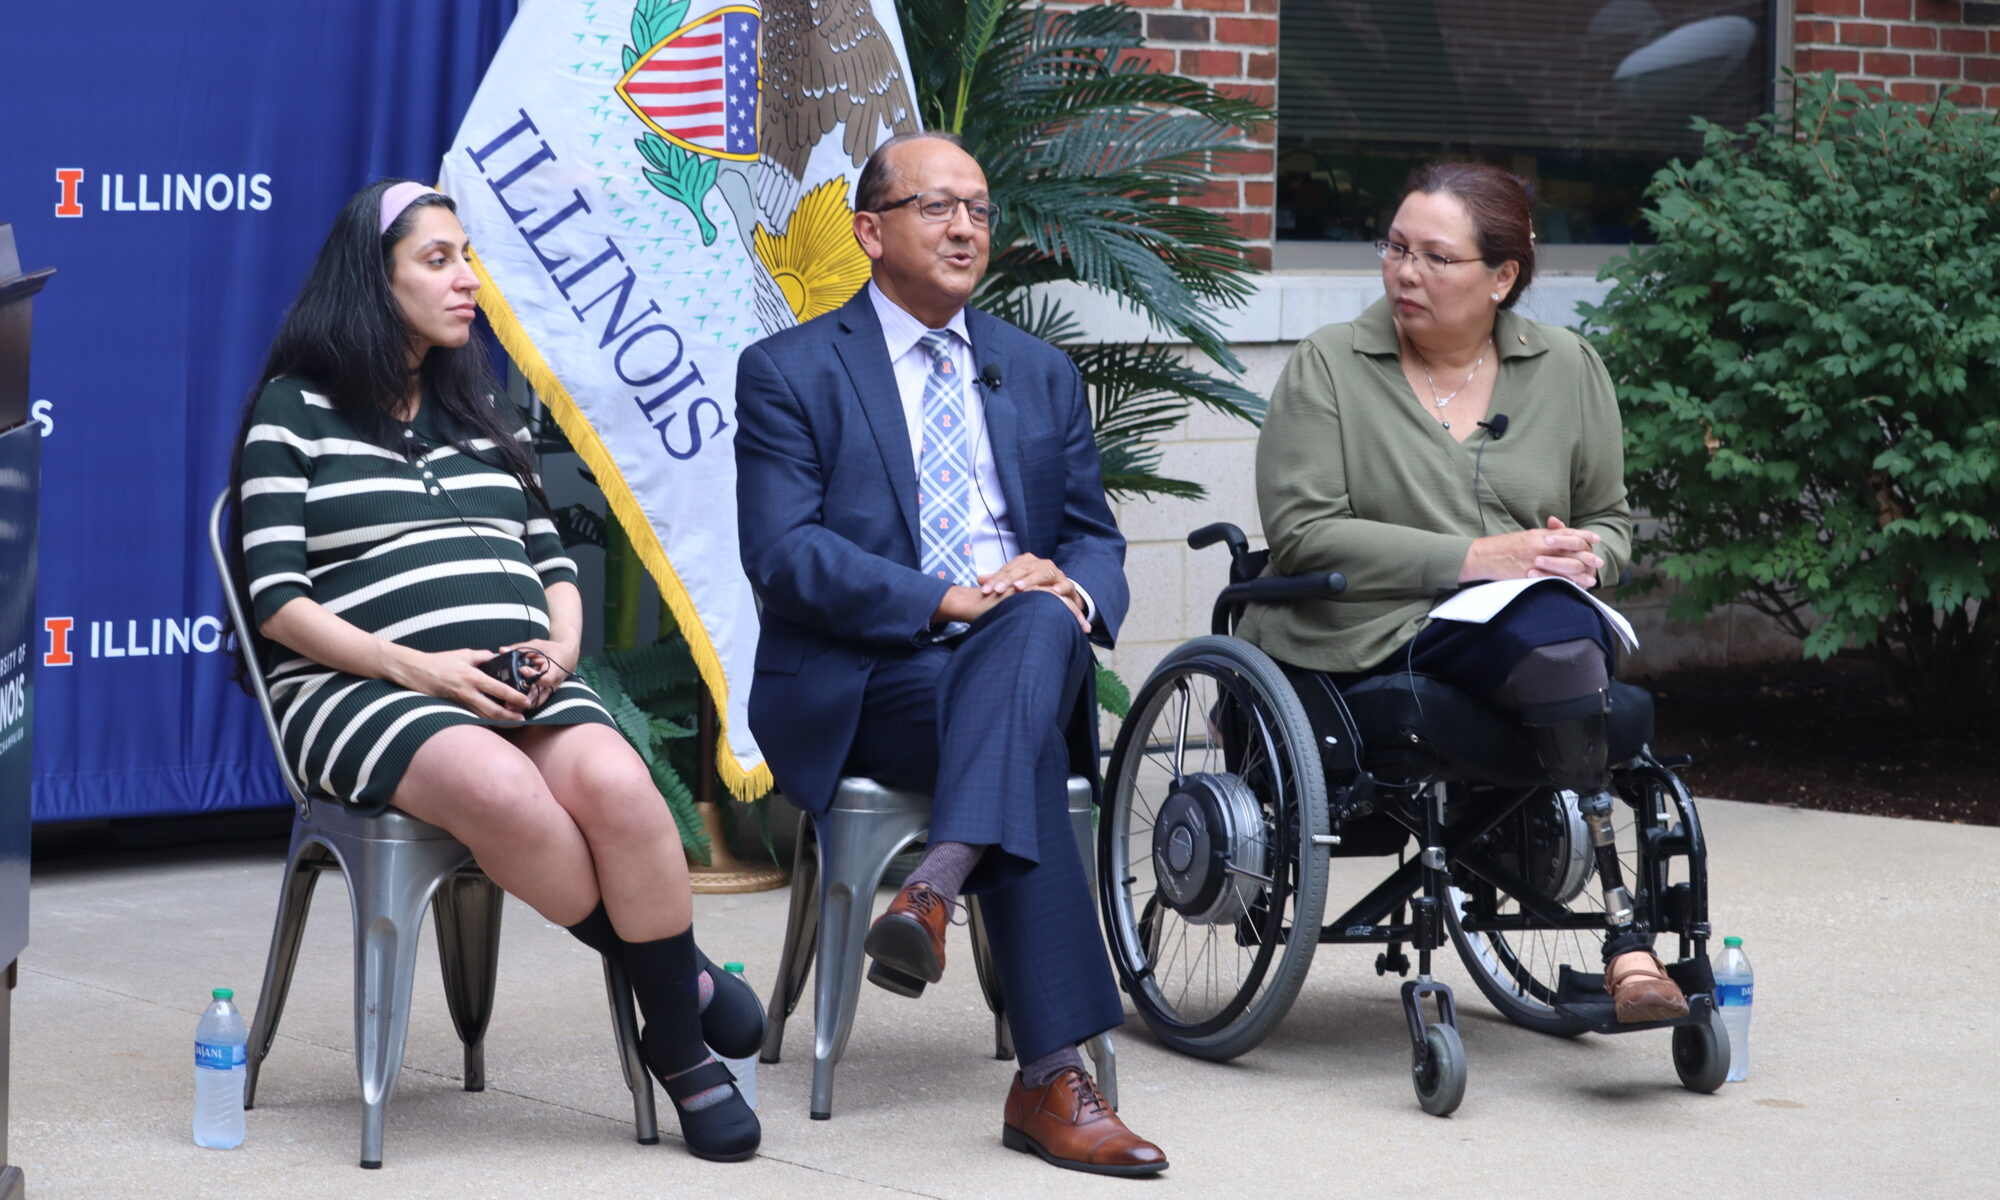 Sen. Tammy Duckworth Highlights Efforts to Promote Illinois Innovation at Research Park Visit 1 Sen. Tammy Duckworth Highlights Efforts to Promote Illinois Innovation at Research Park Visit